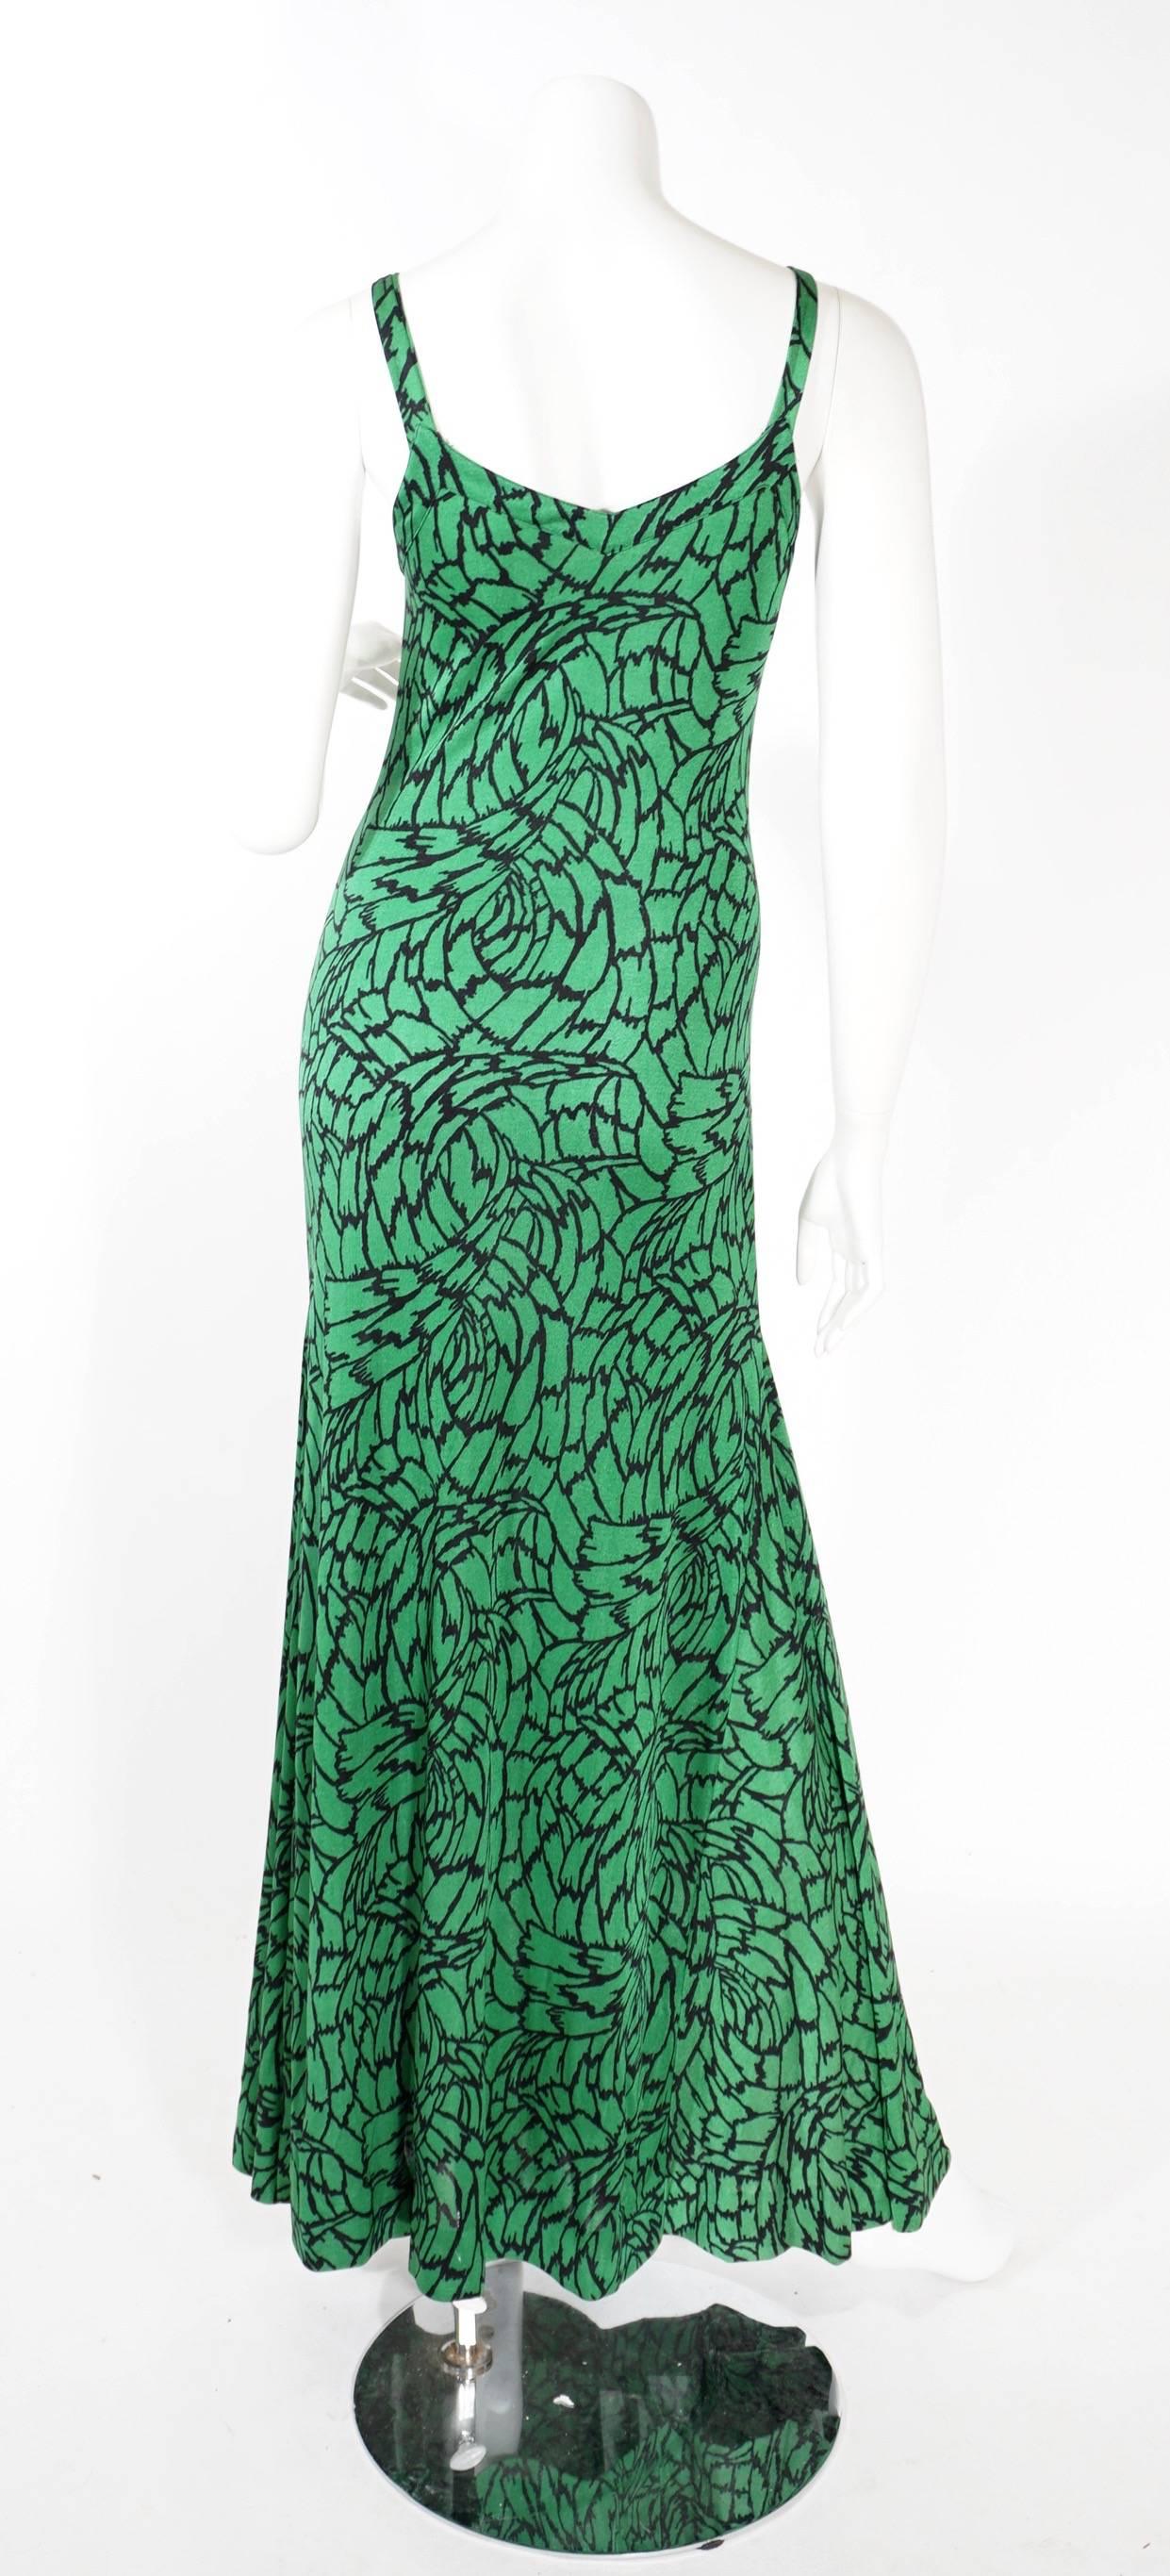 Vintage DVF maxi gown with matching l/s shirt and tie for waist or neck, circa 1970s. Features small V neck and back. Amazing mint condition set. 

Measurement:
Dress- 58 in L, 25 in Waist (some give), Bust up to 34 in
Shirt- L 30 in, Arm L 23